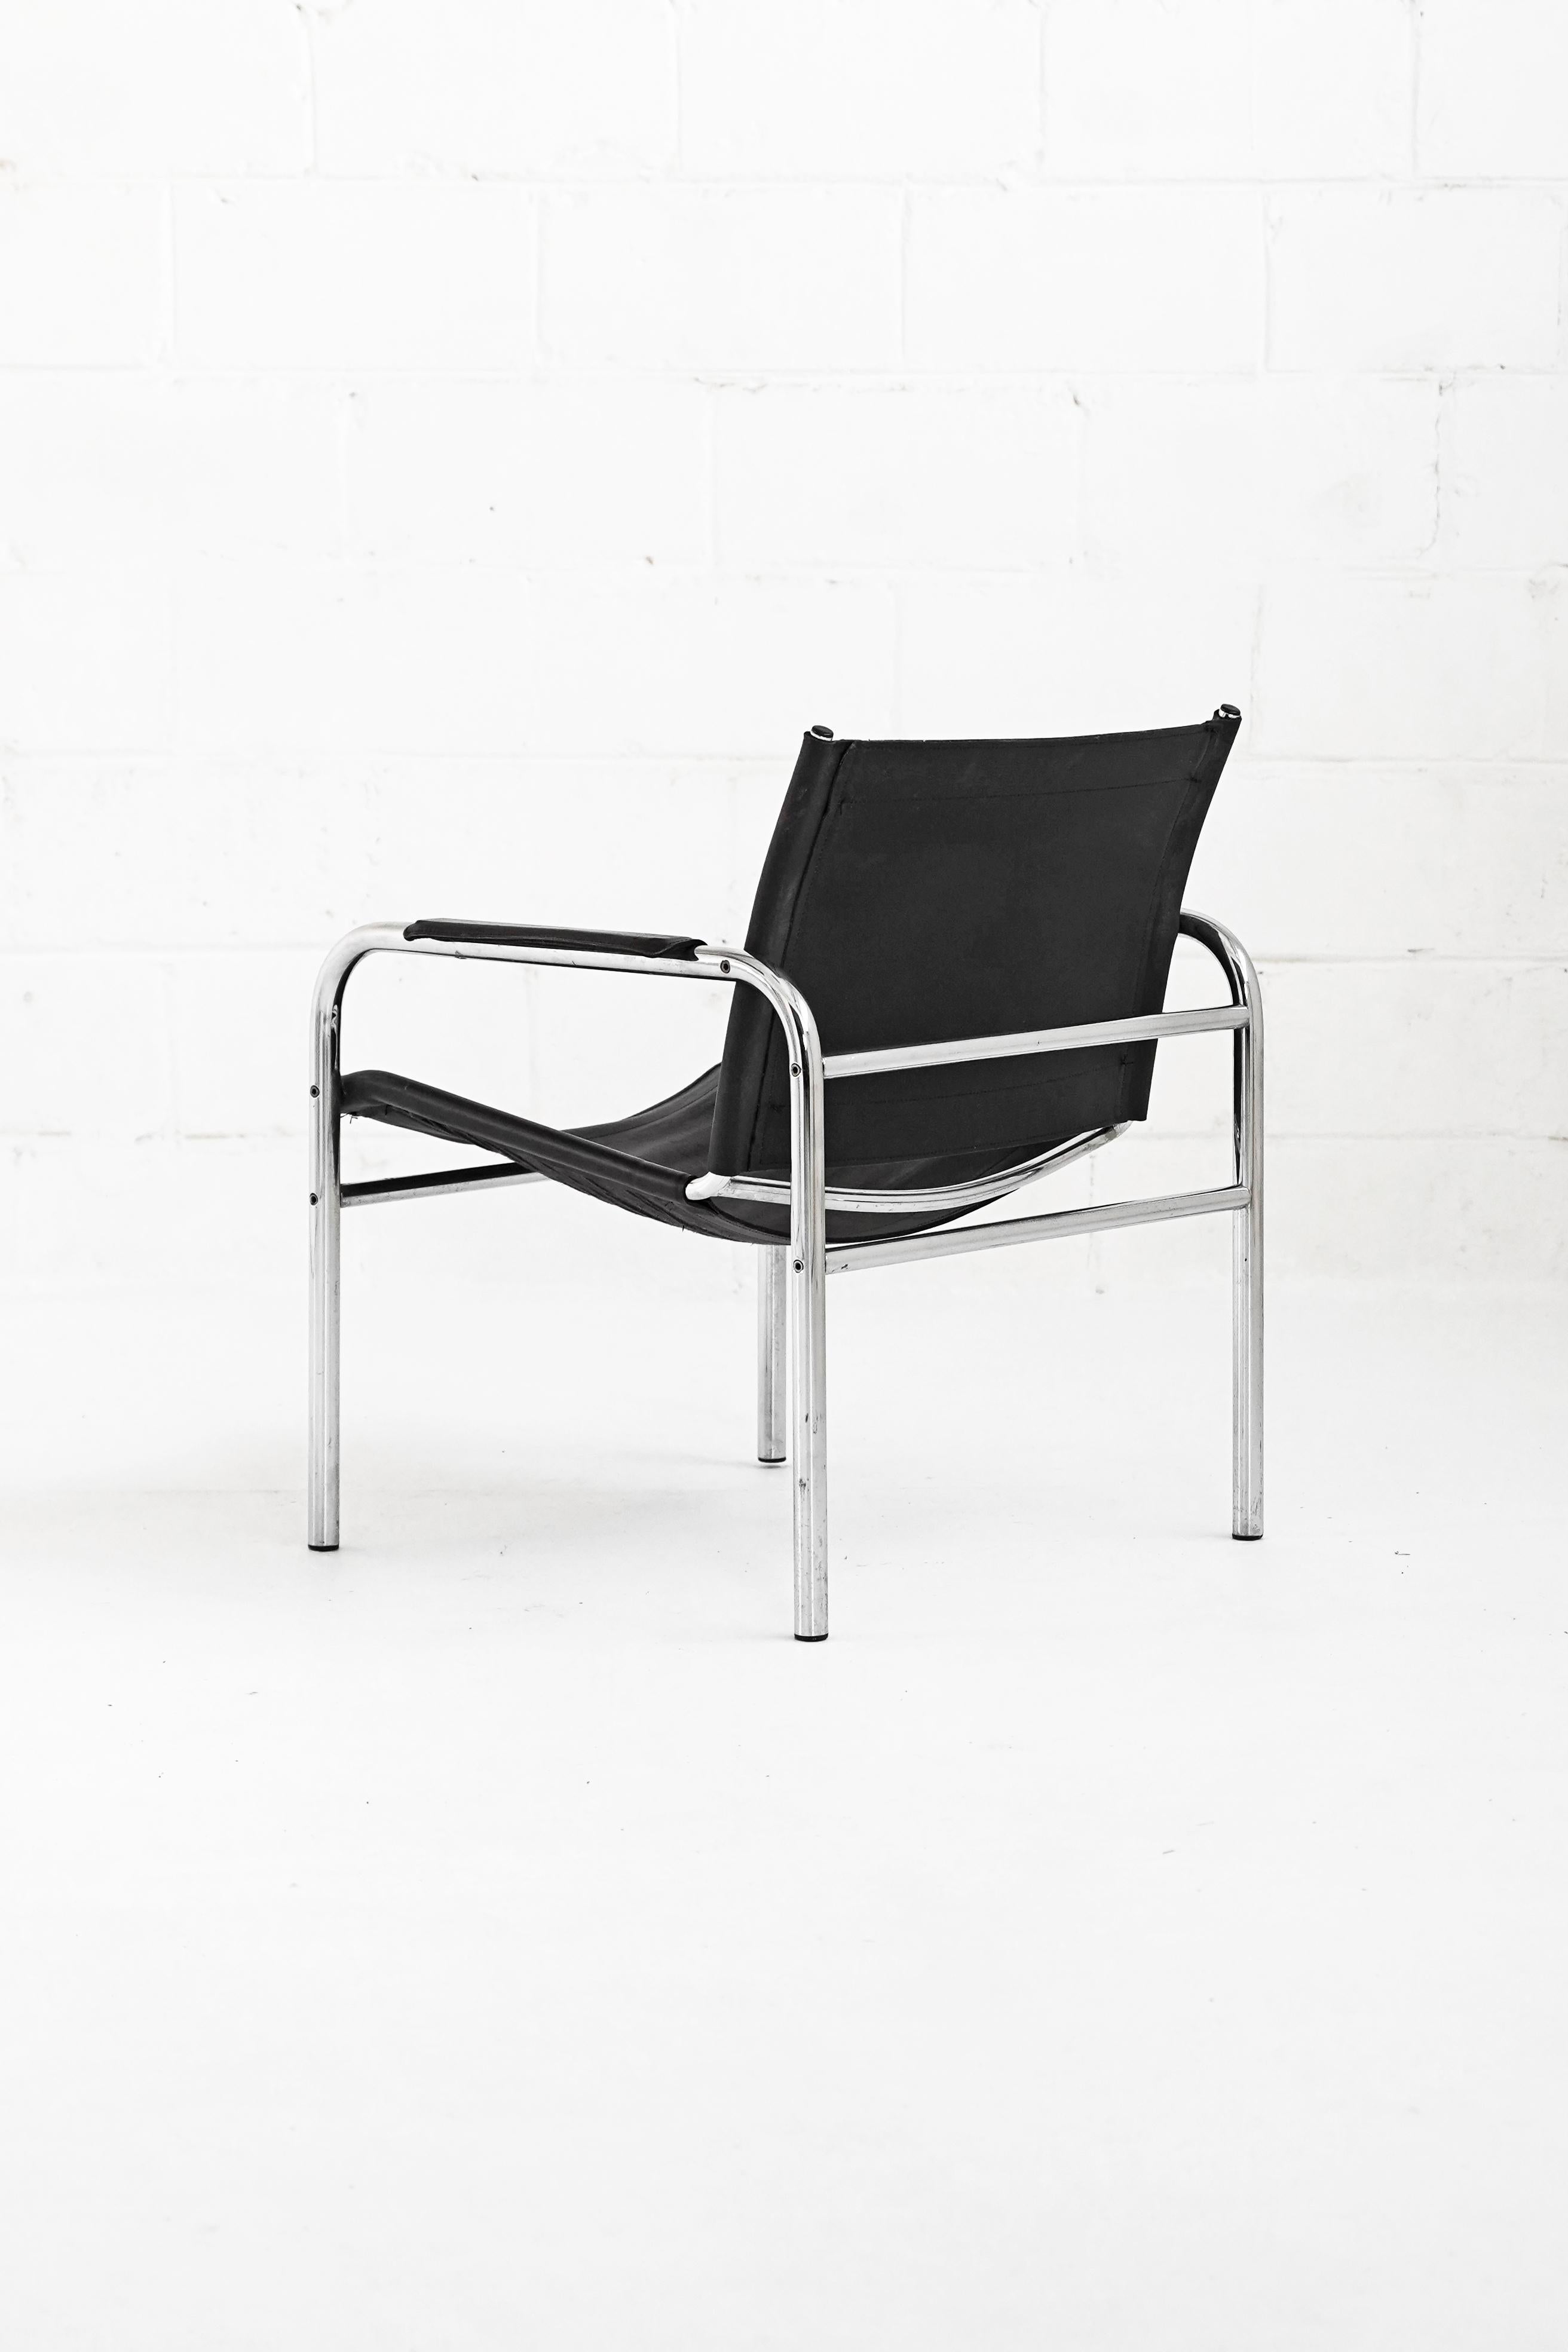 Beautiful chrome and patinaed black leather Klinte Easy chair by Tord Björklund. A stunning piece in overall great vintage condition, with minor wear and amazing patinaed leather, shown in photos. 3 chairs available, same overall condition.